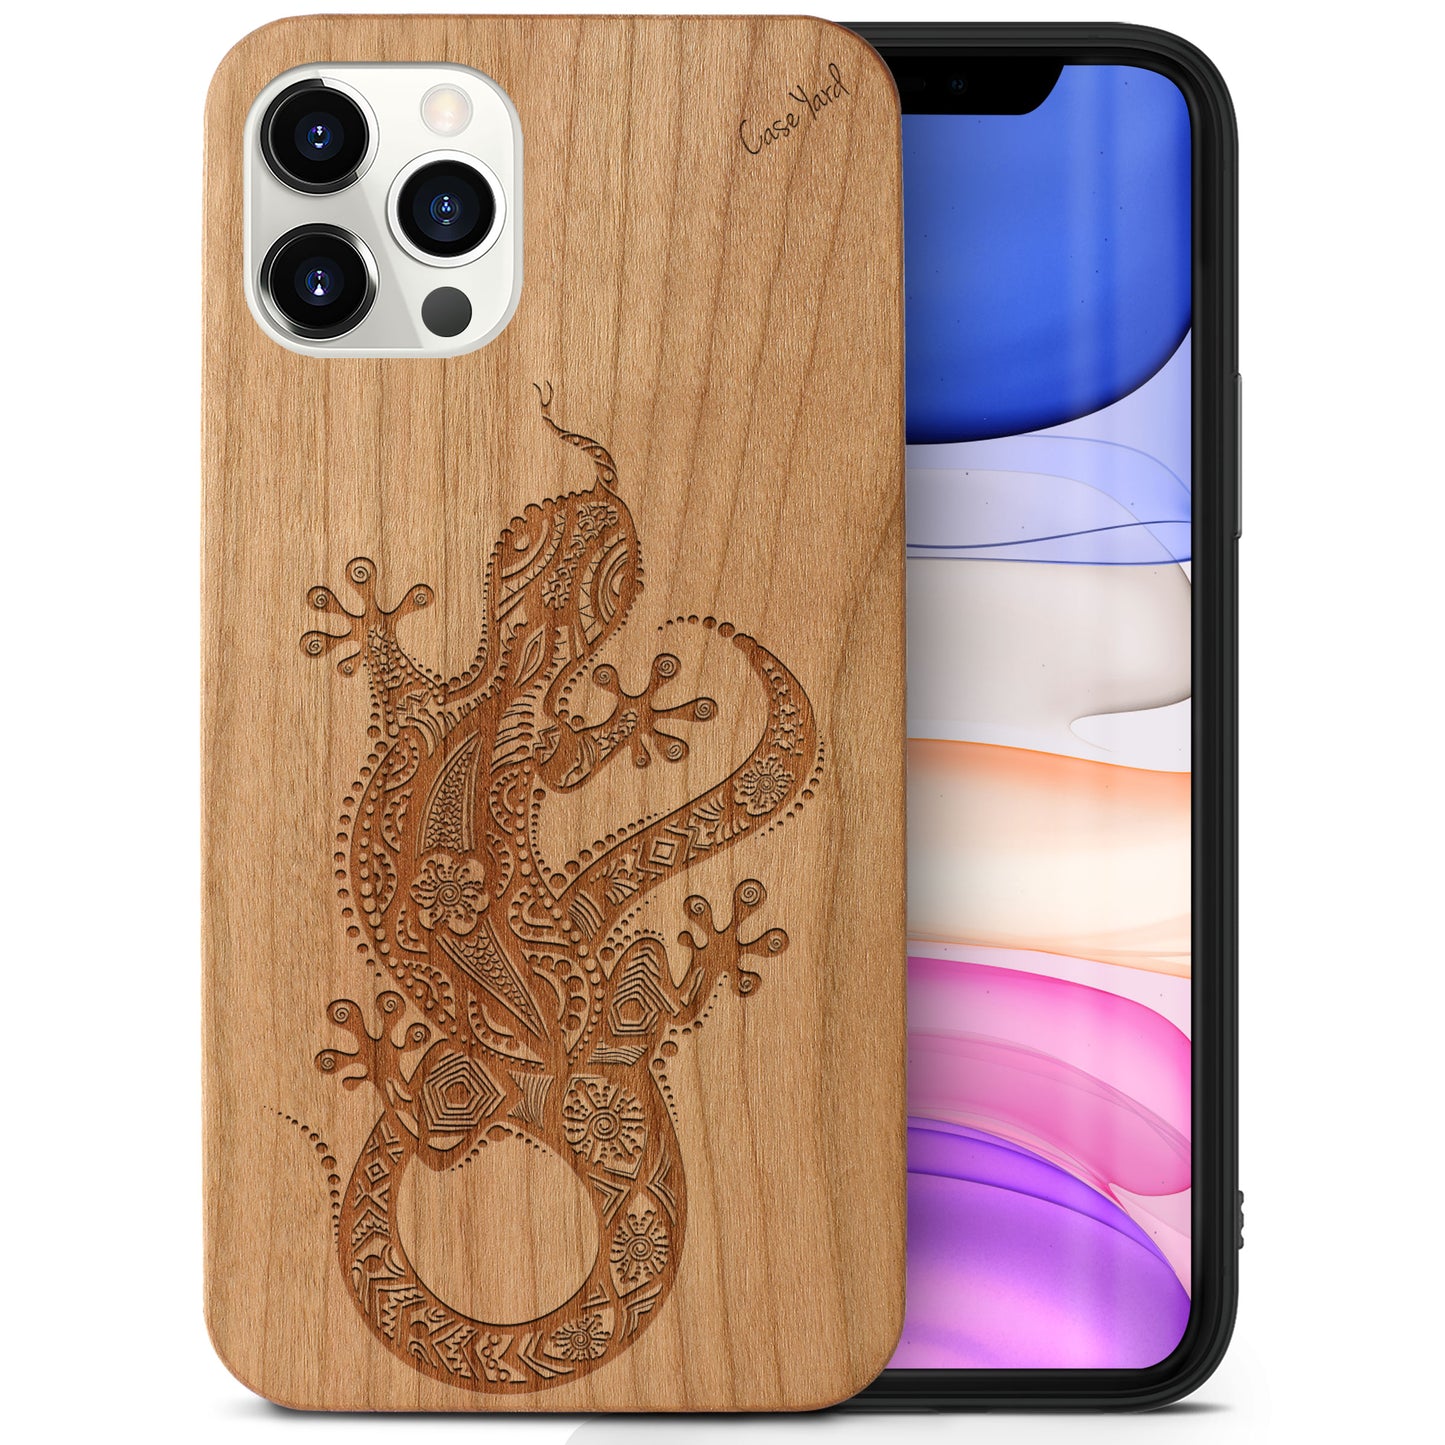 Wooden Cell Phone Case Cover, Laser Engraved case for iPhone & Samsung phone Tribal Lizard Design